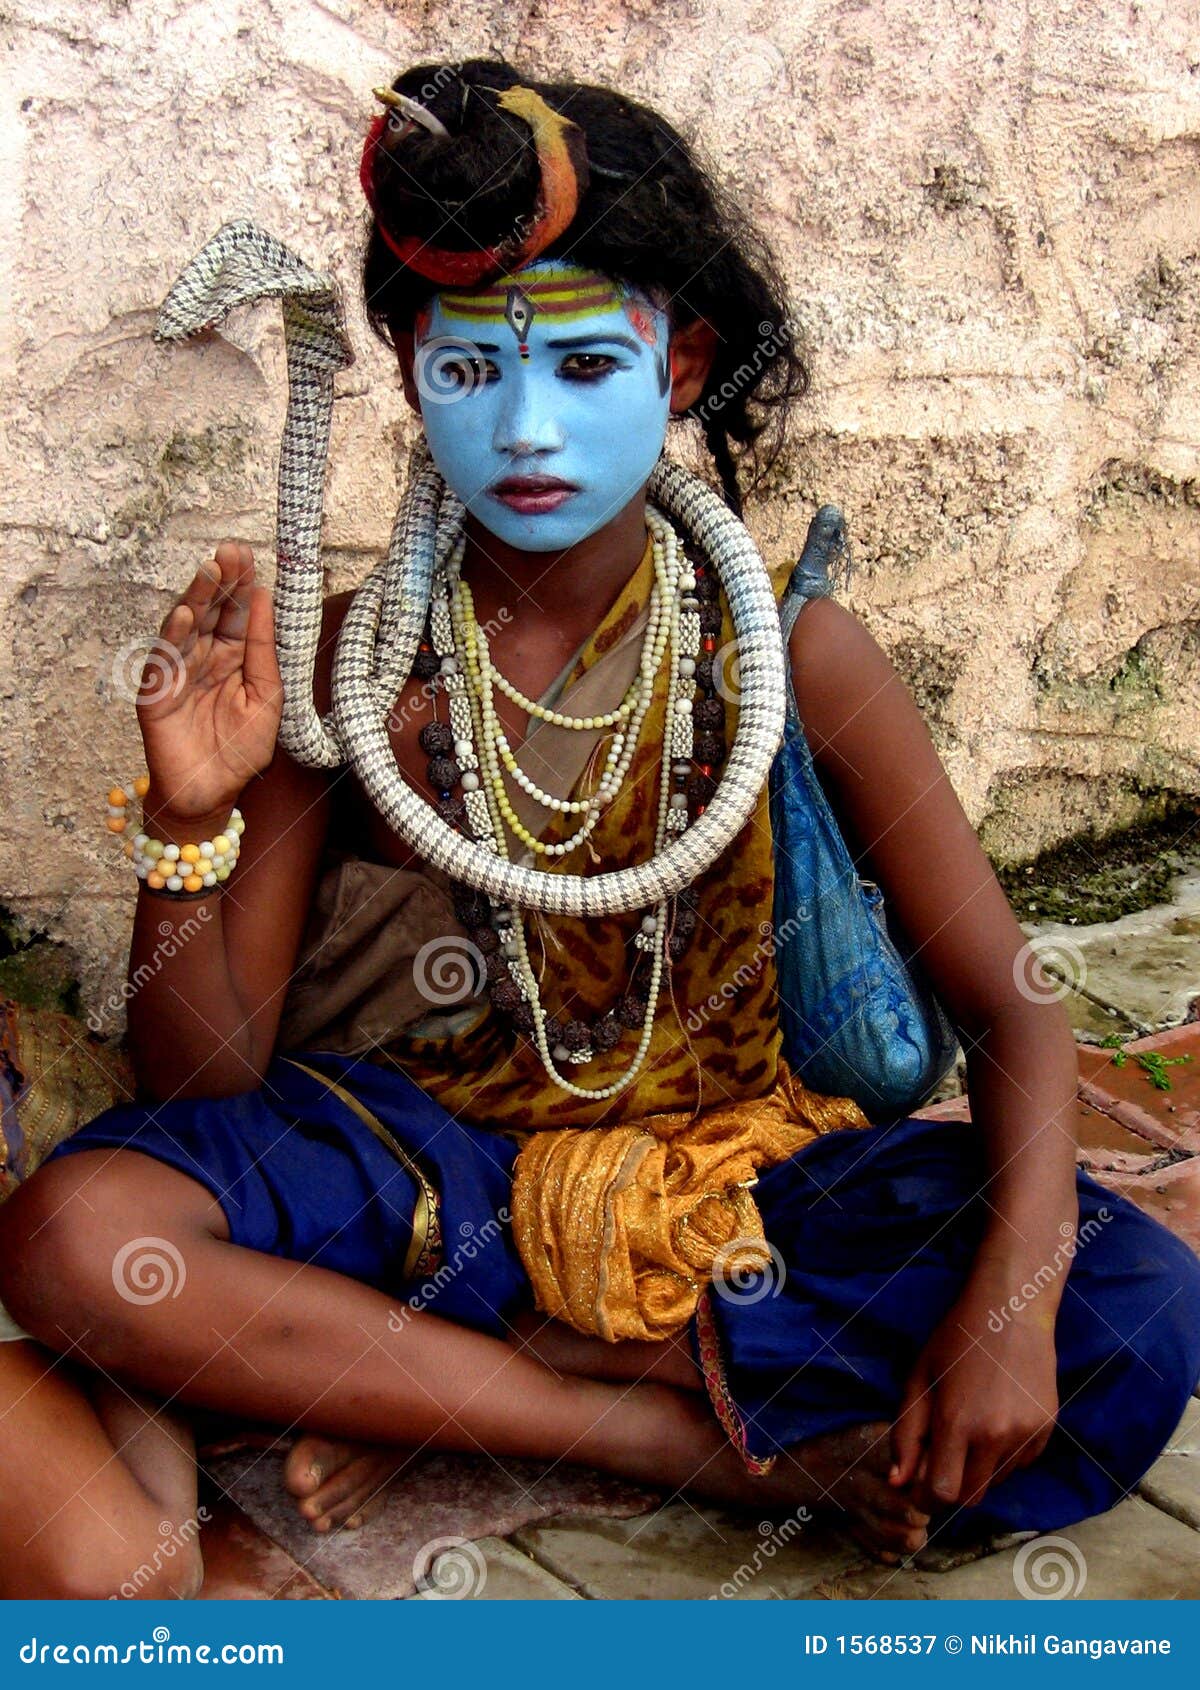 Shiva Impersonation stock image. Image of cultures, cloth - 1568537